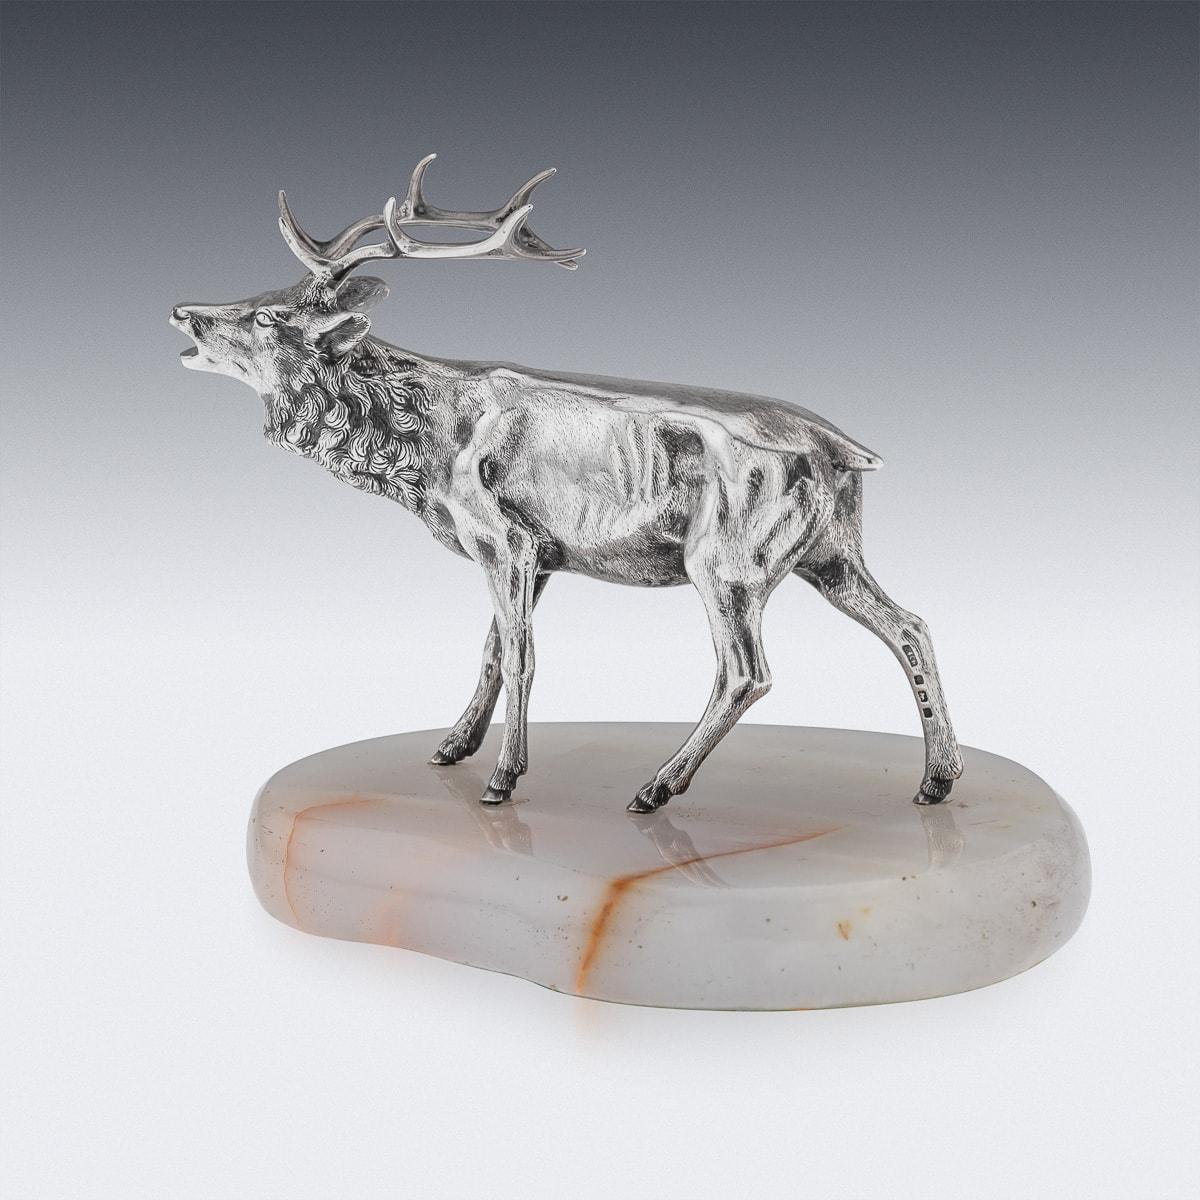 Antique 20th Century solid silver table ornament in the form of a stag standing on an oval stone base. Hallmarked English silver marks (925 standard), Birmingham, year 1921 (w), Makers mark C&CH (C & C Hodgetts).